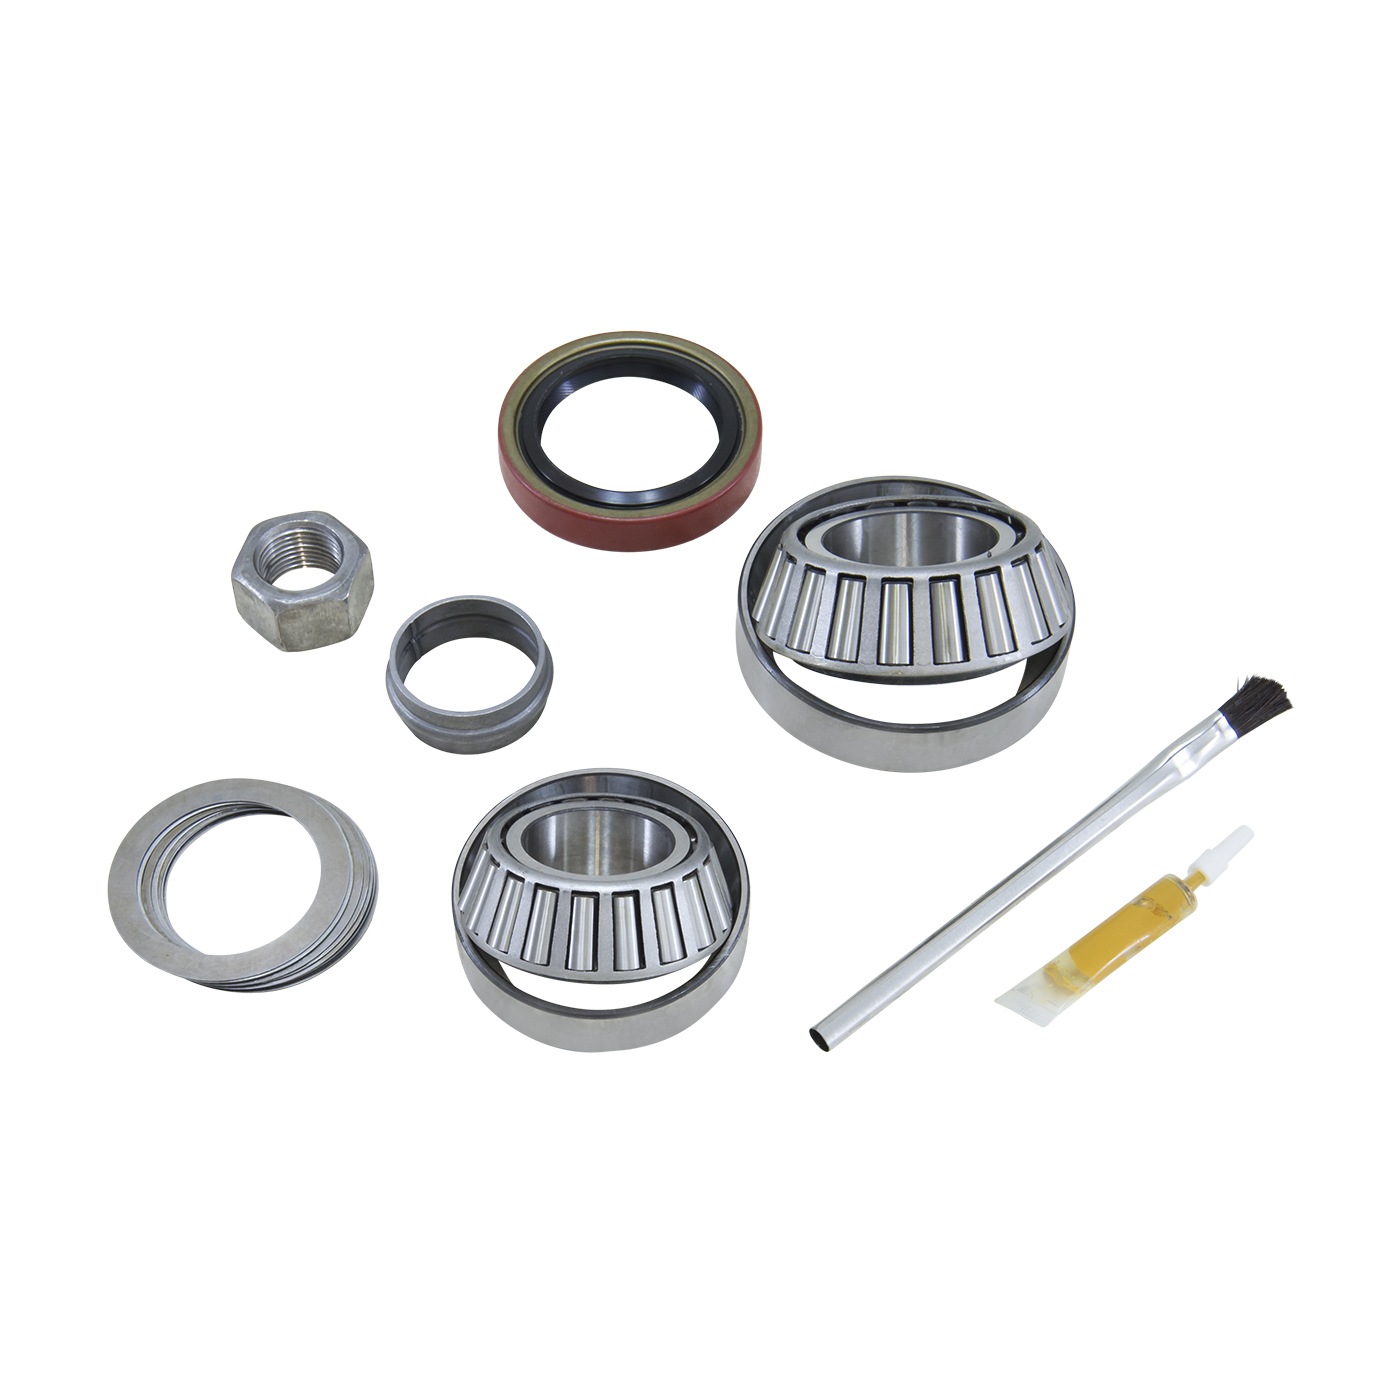 Yukon Pinion install kit for GM 12 bolt truck differential 